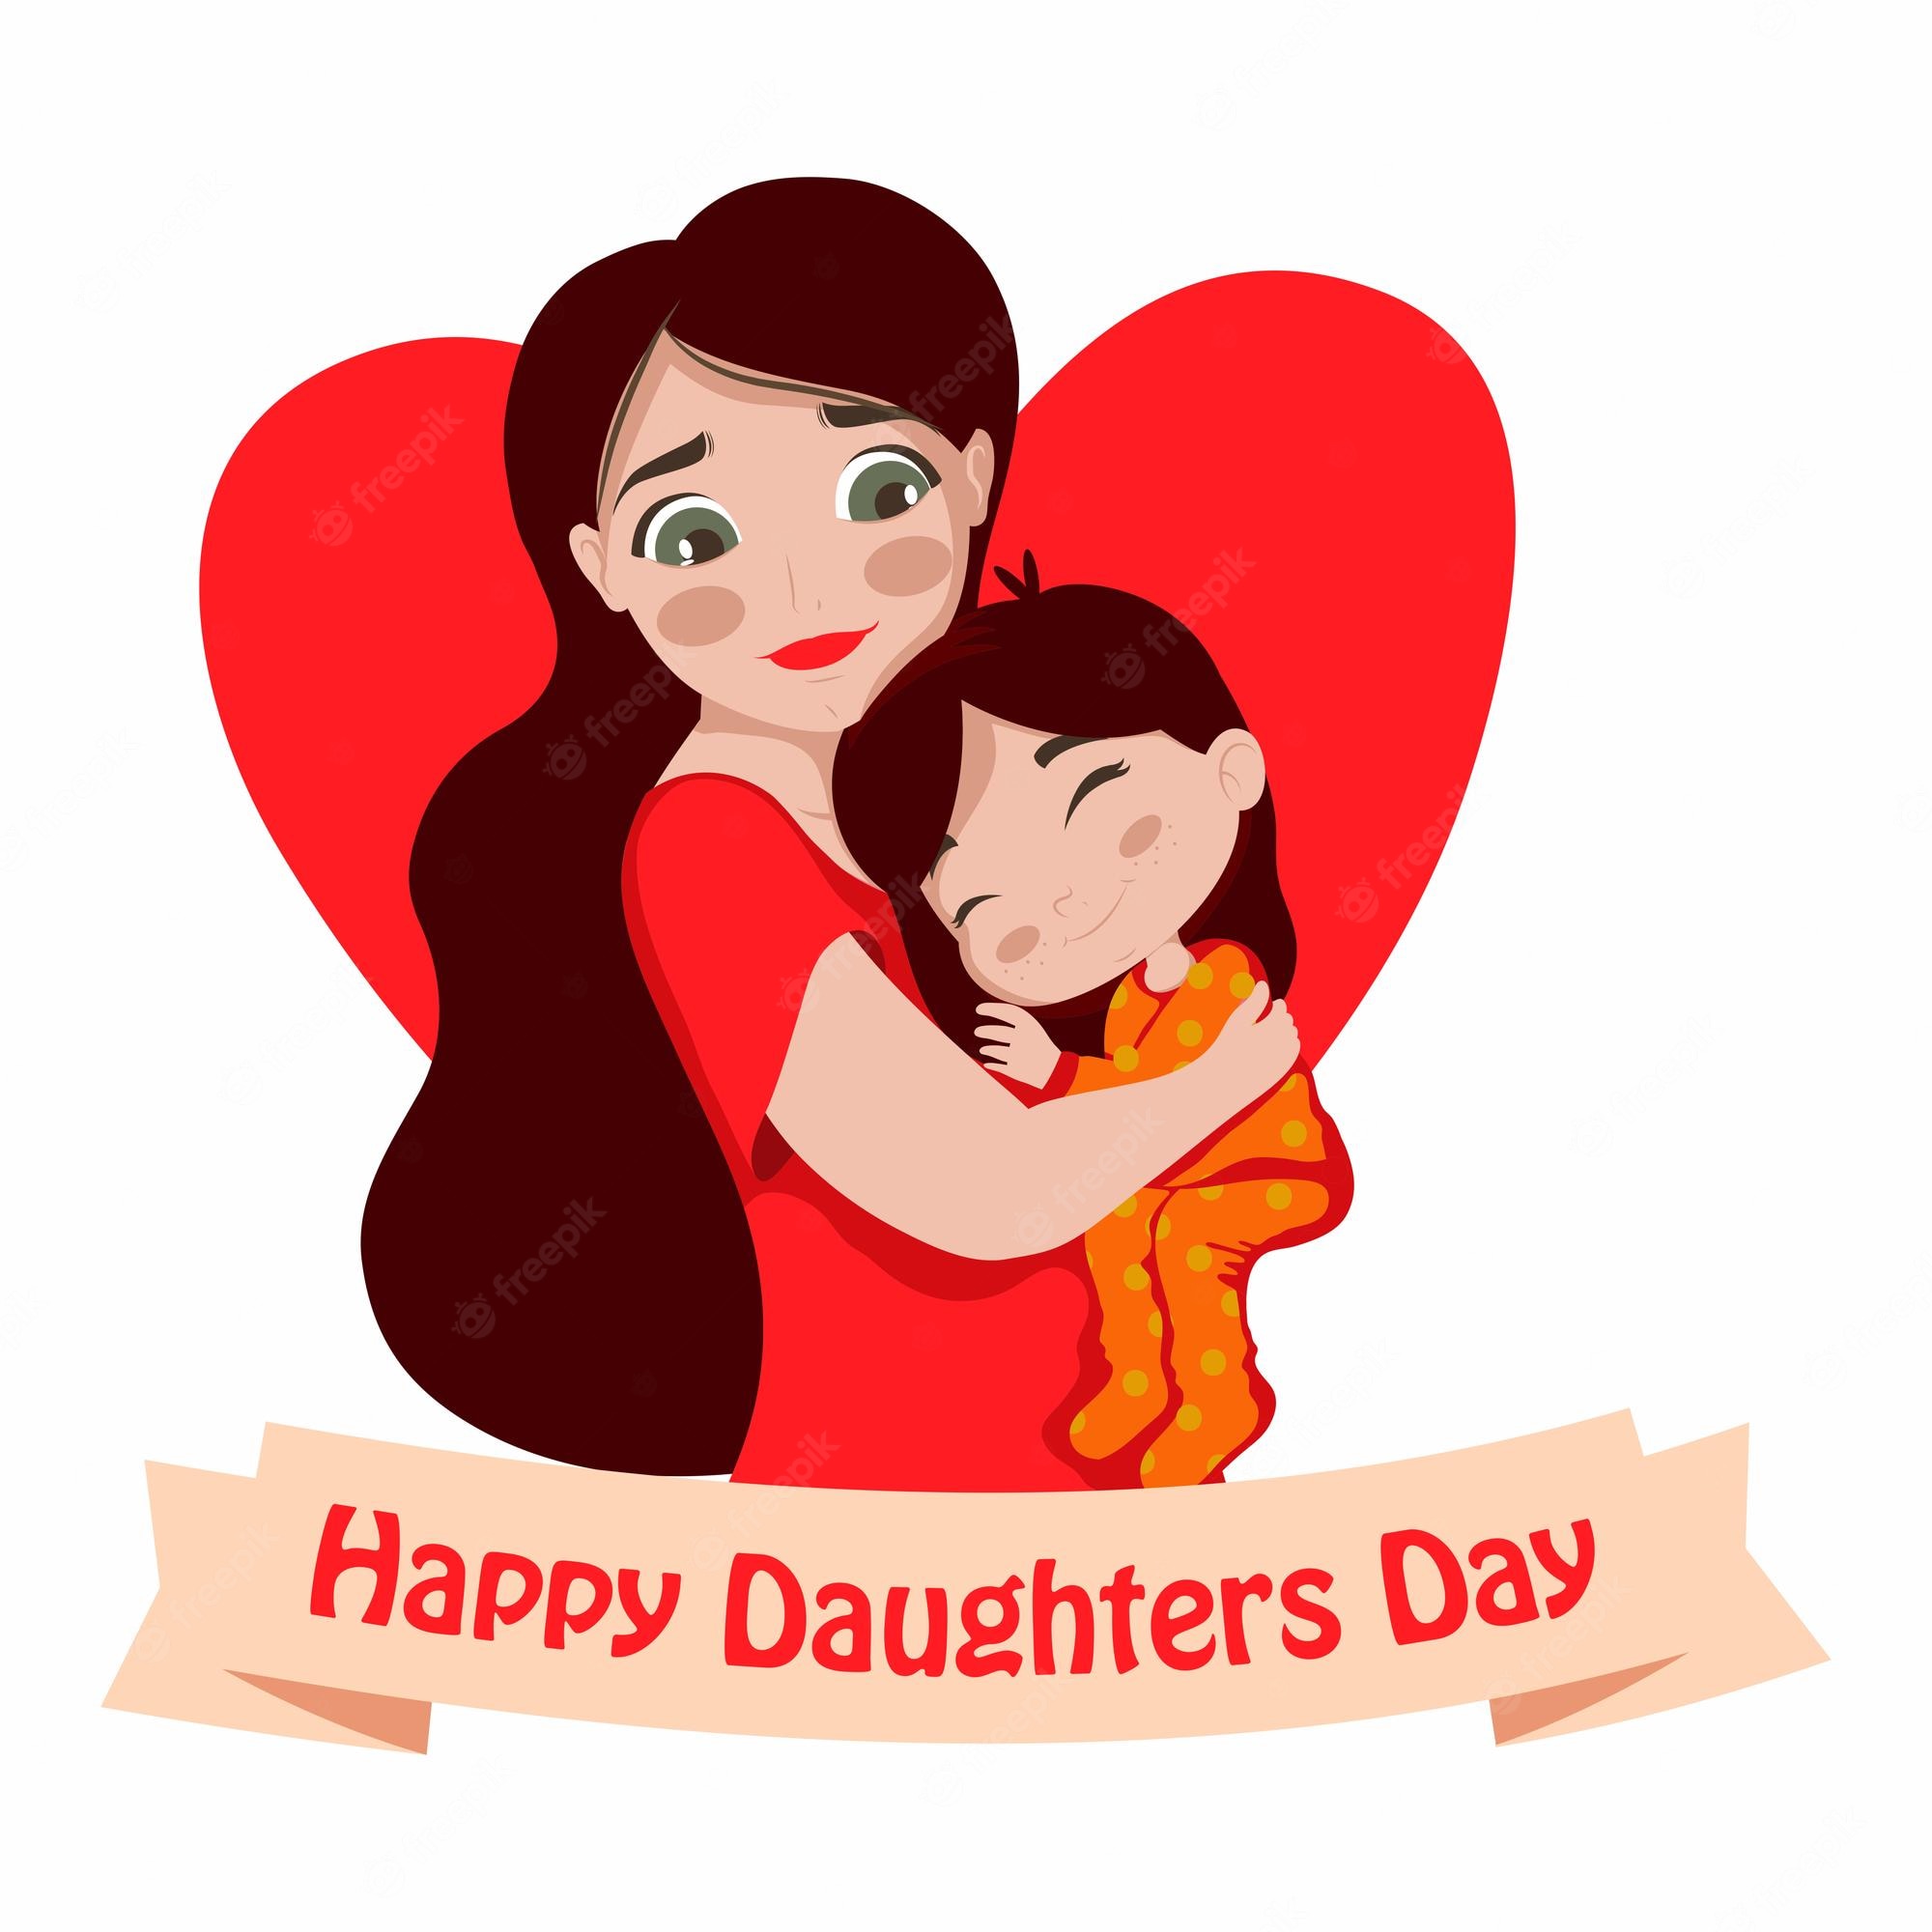 National Daughters' Day